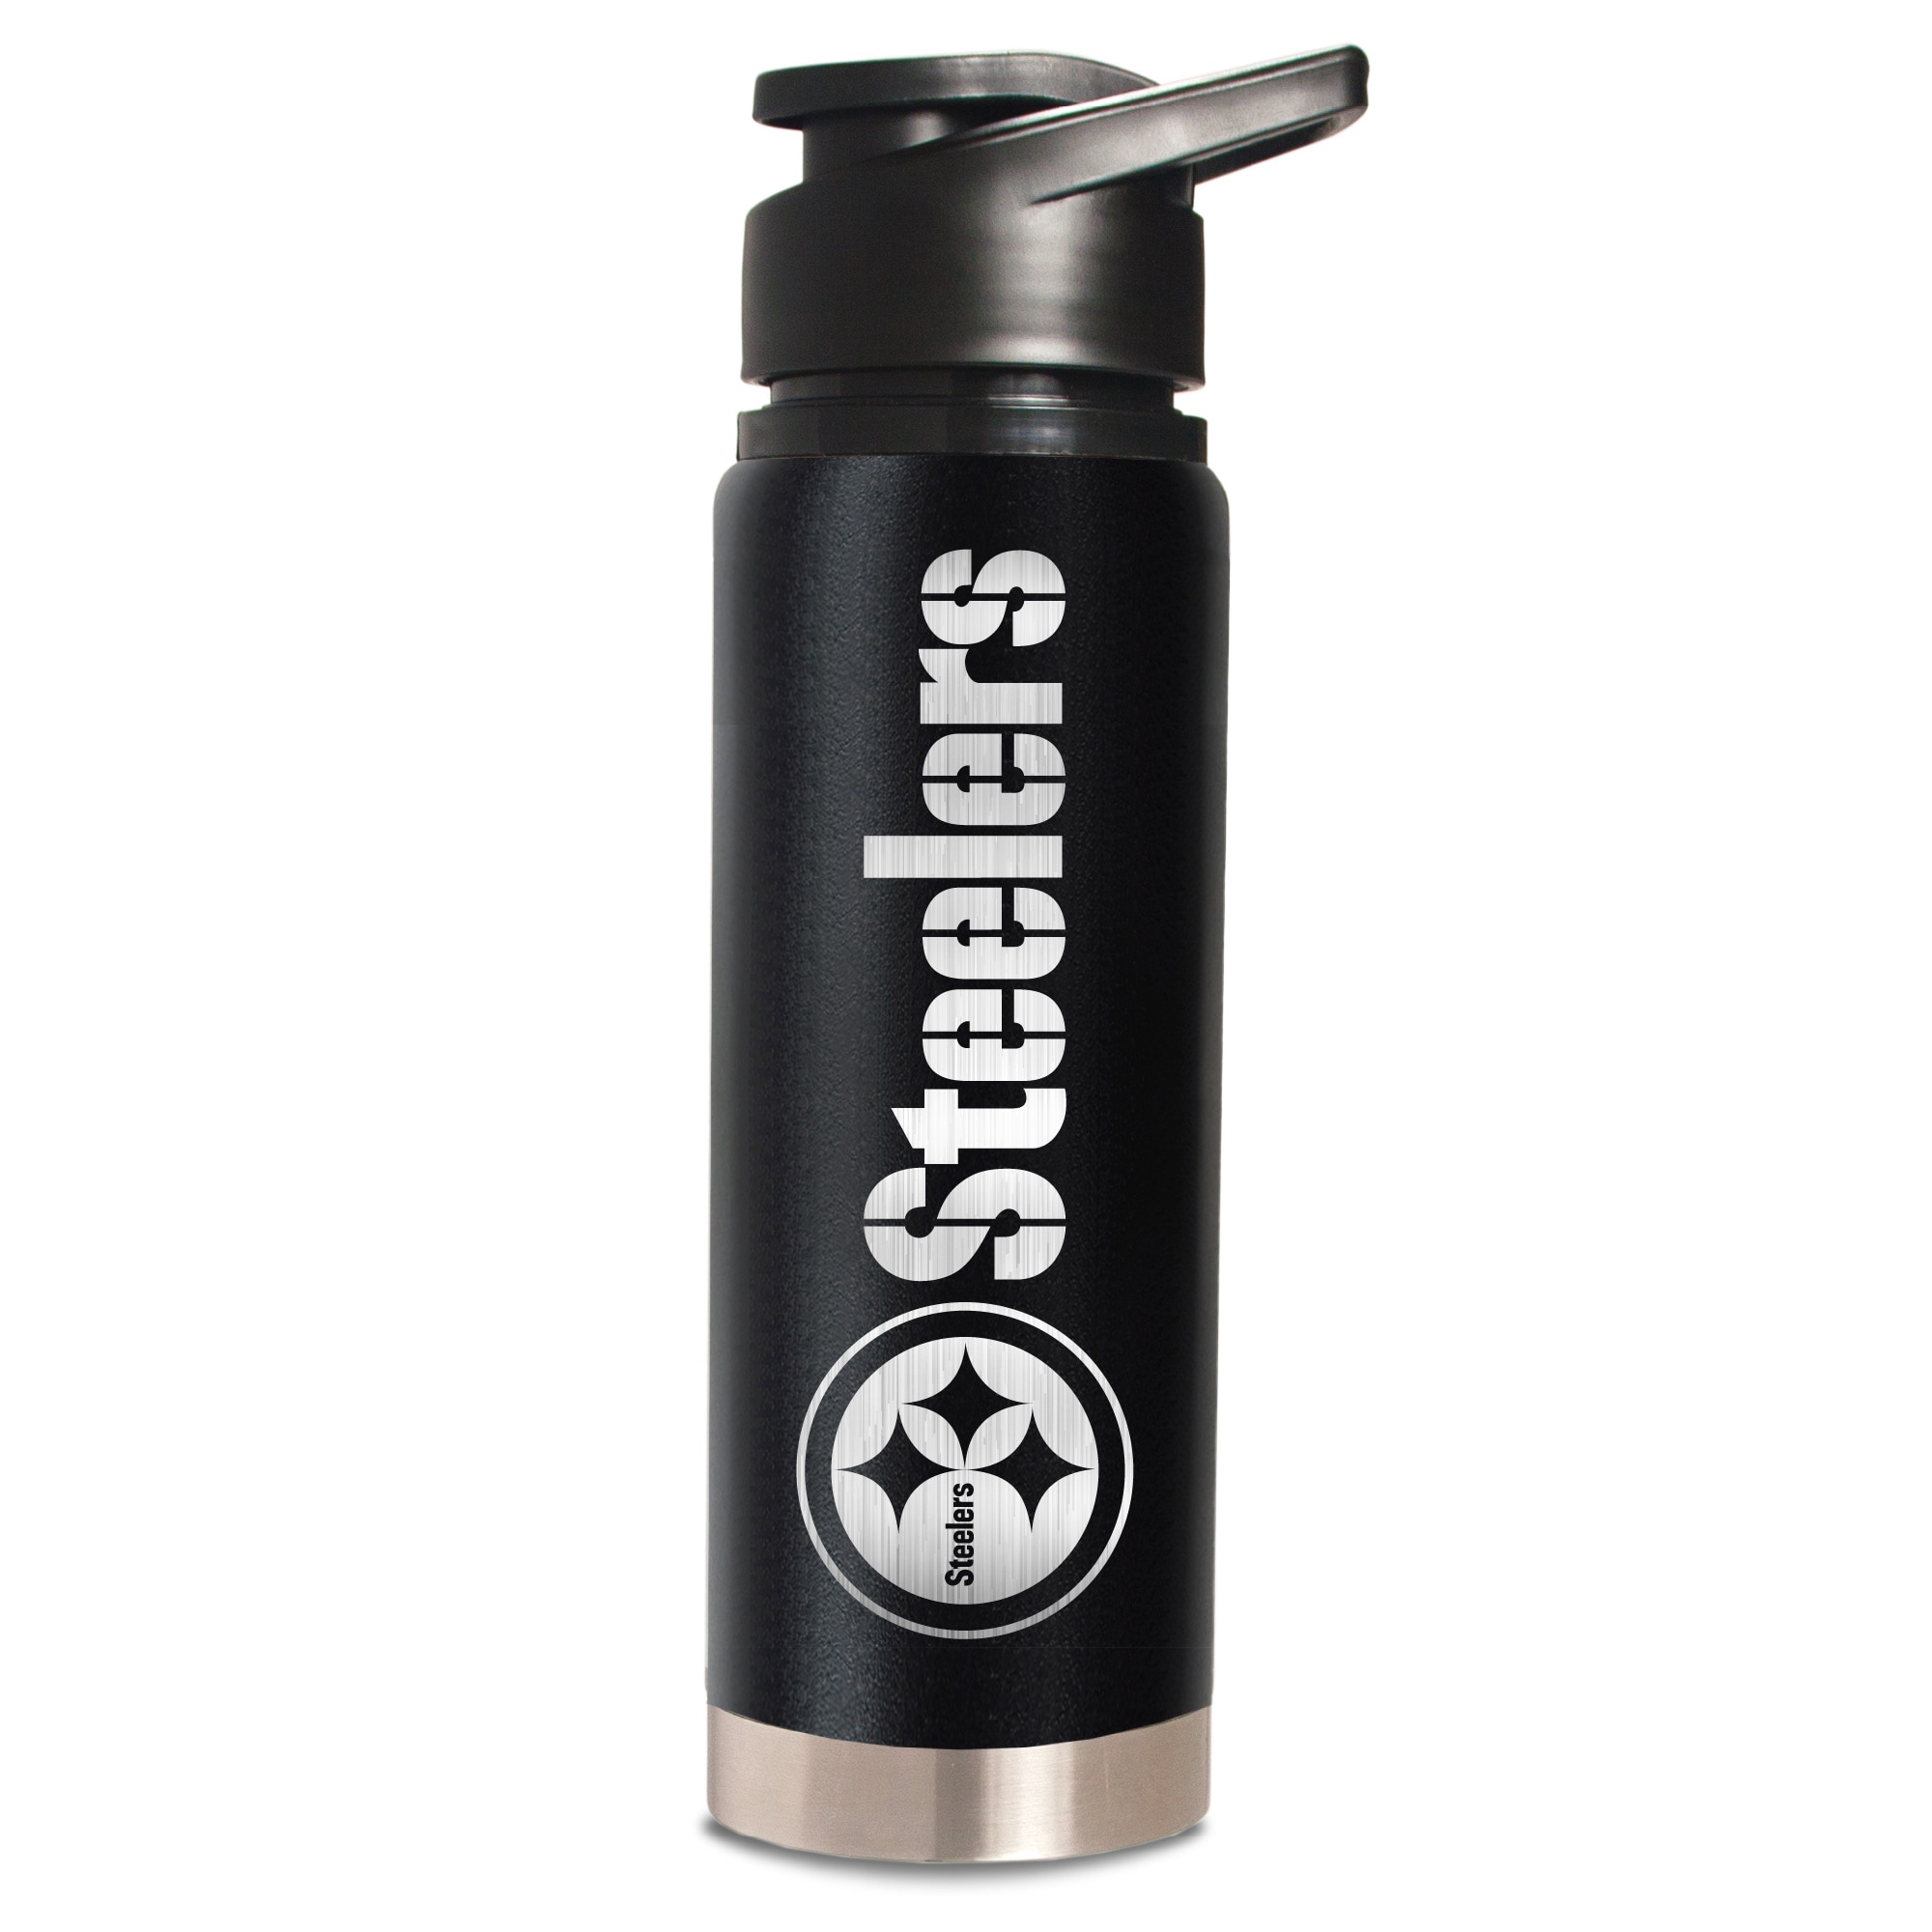 GREAT AMERICAN Pittsburgh Steelers 20-fl oz Stainless Steel Insulated Water  Bottle at